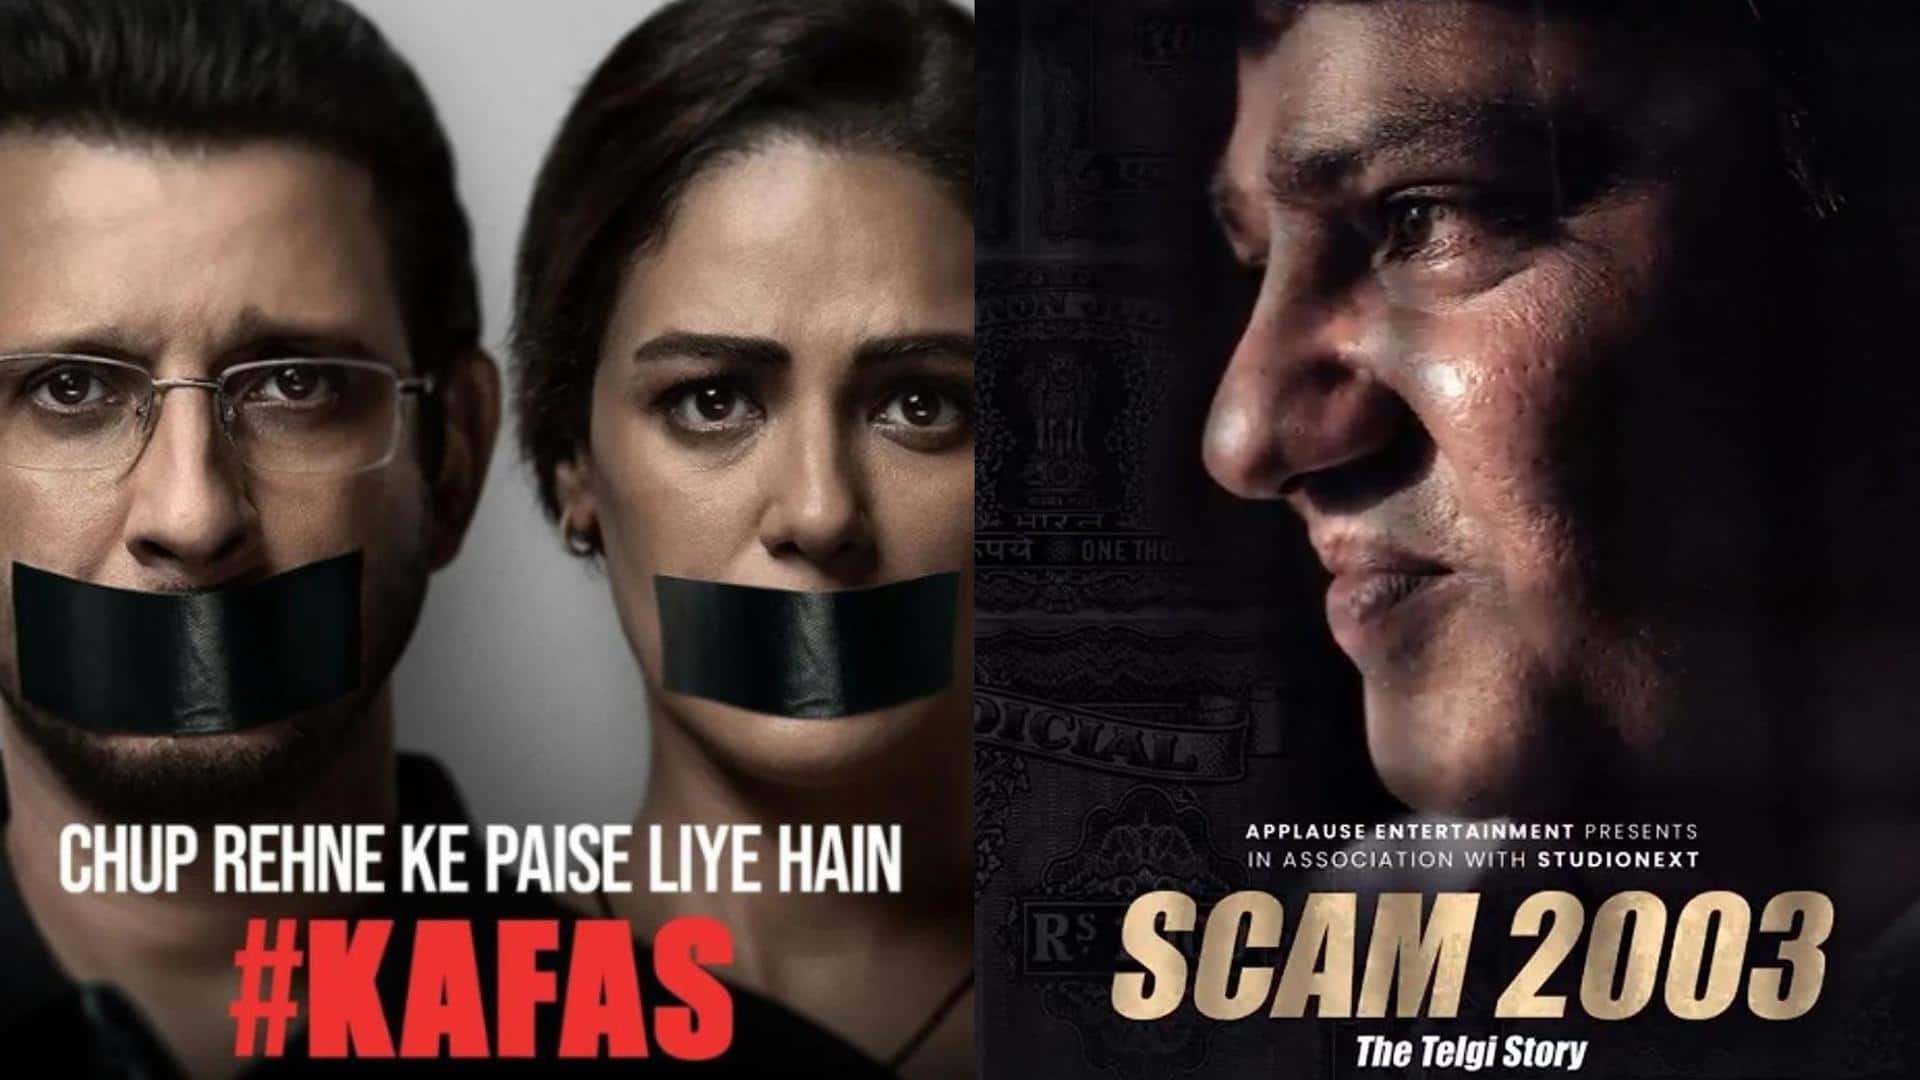 All about SonyLIV's upcoming shows 'Kafas' and 'Scam 2003'